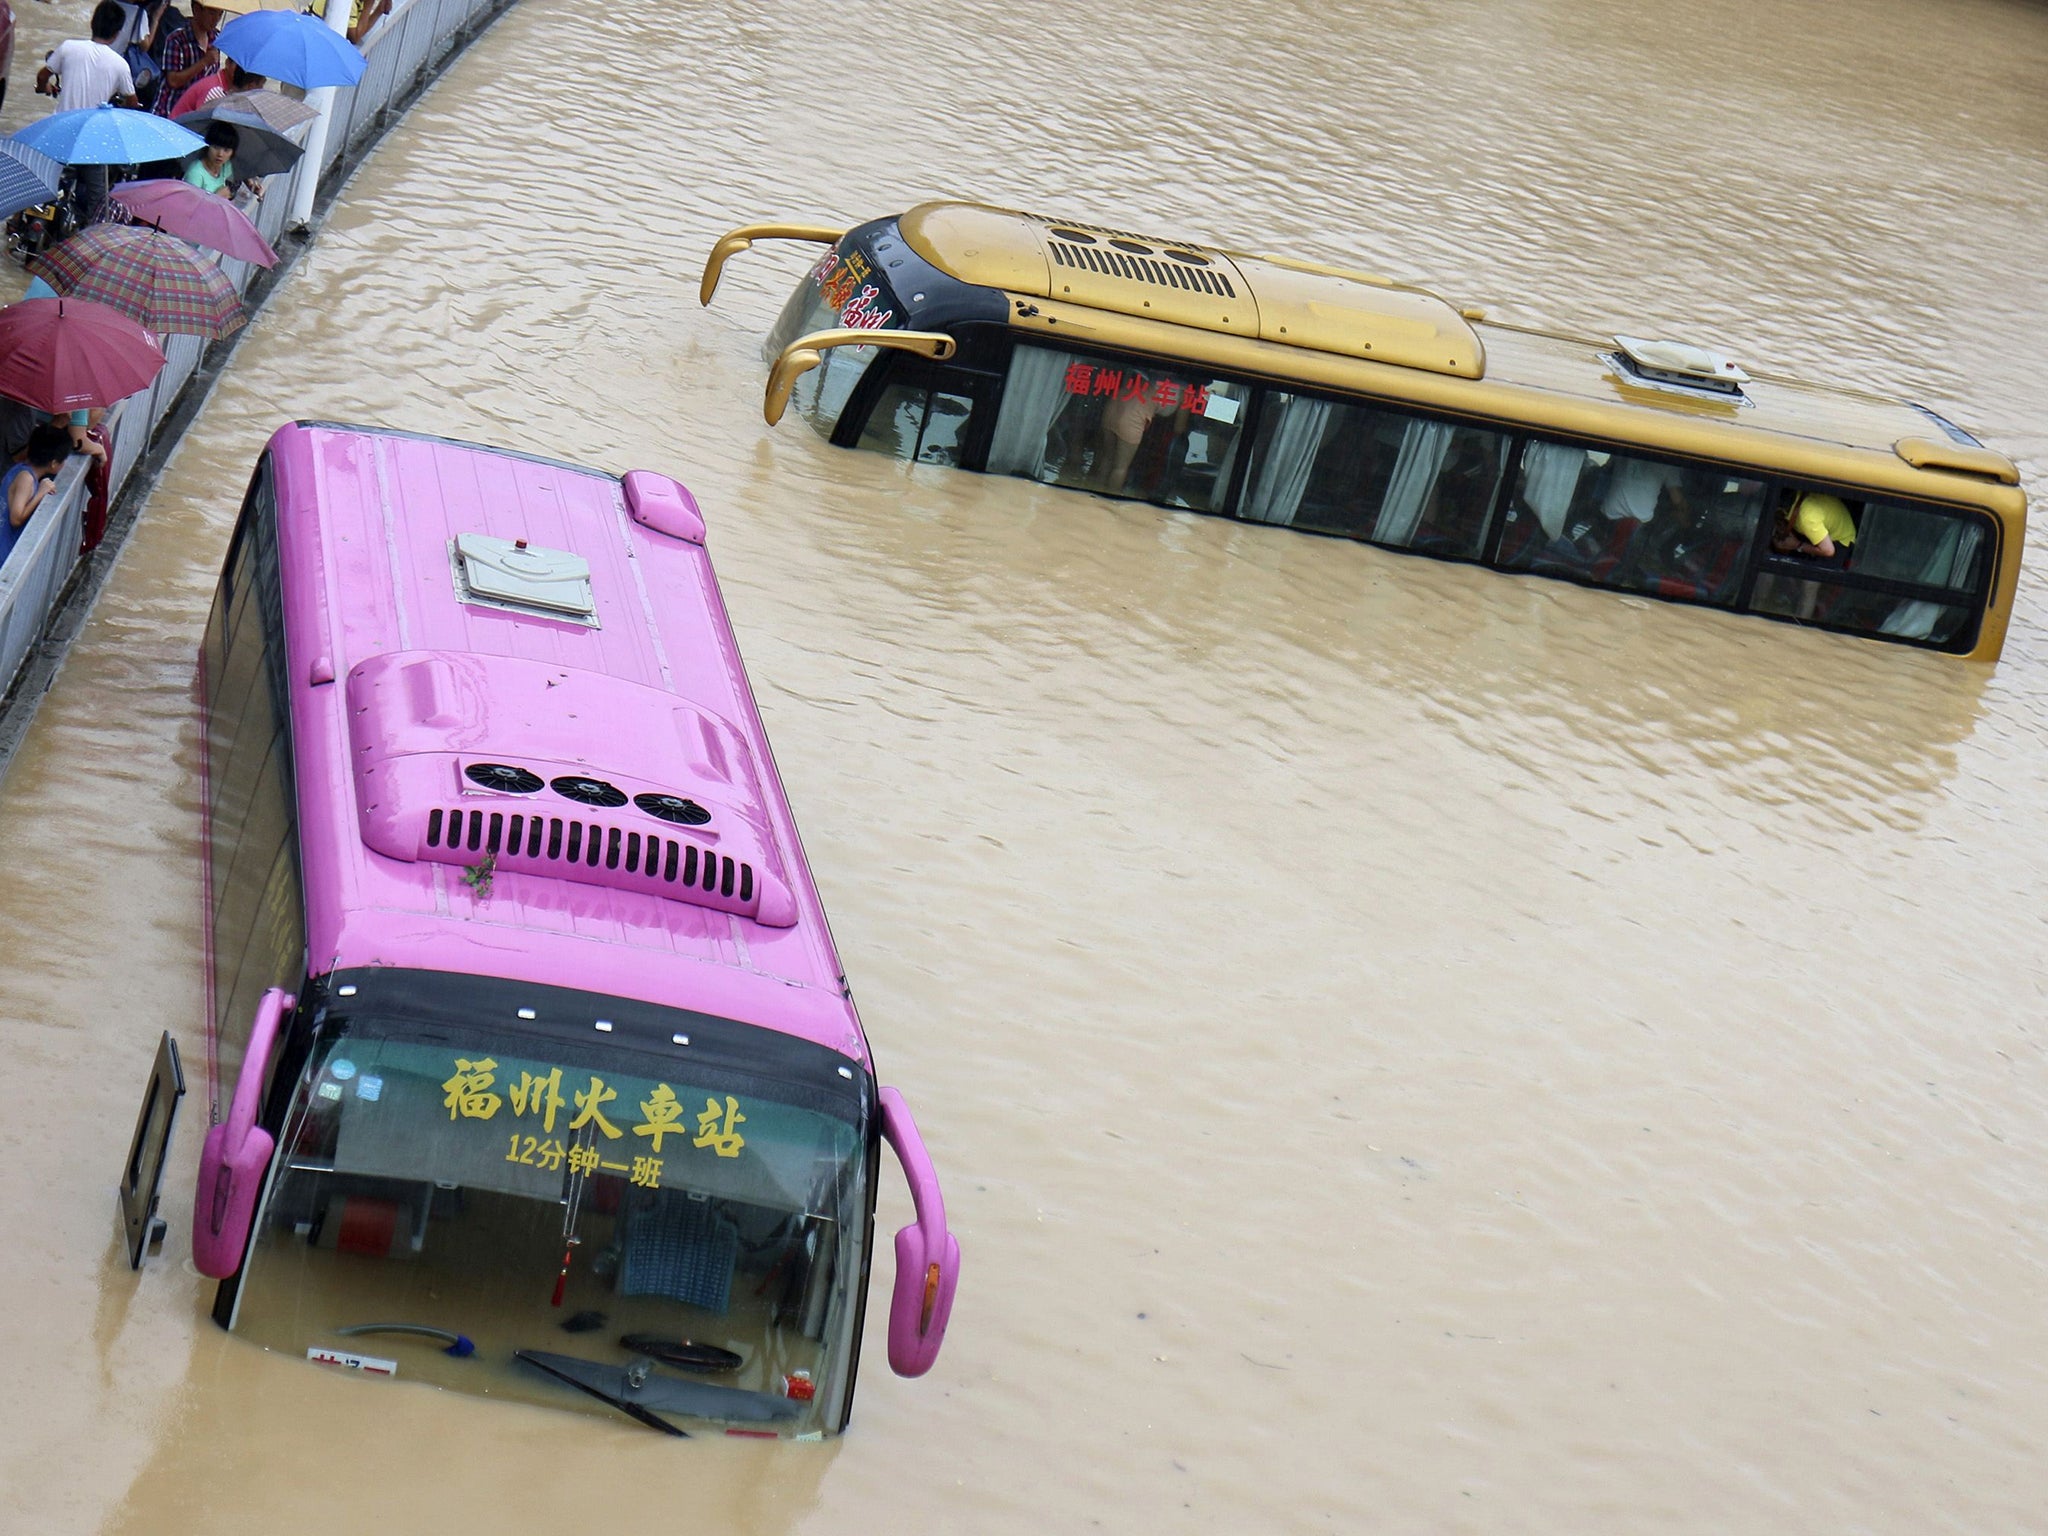 Buses are stranded in a flooded street in Fuzhou, Fujian province